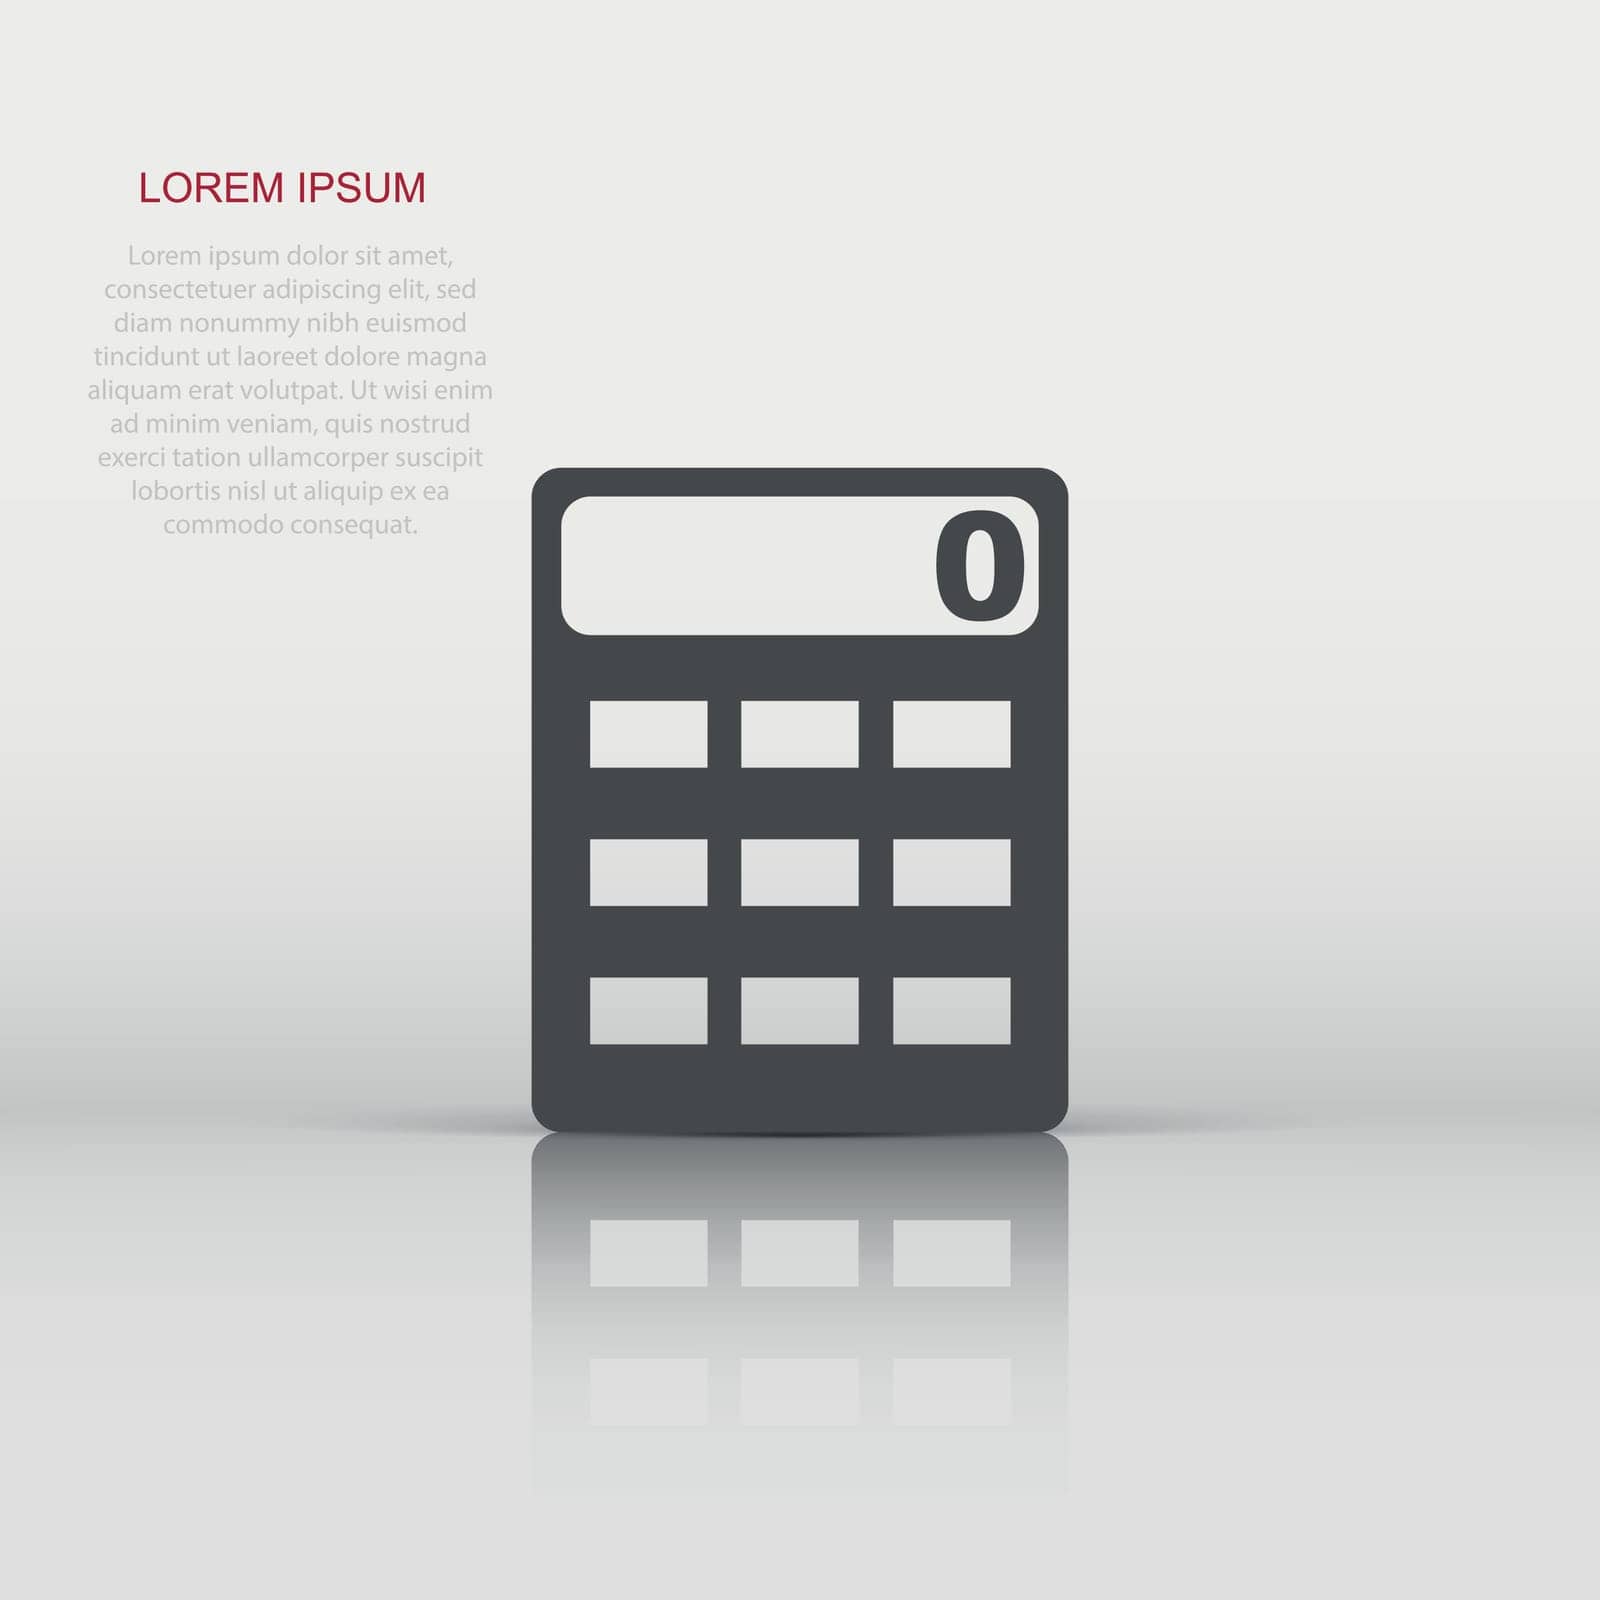 Calculator icon in flat style. Calculate illustration pictogram. Finance sign business concept.